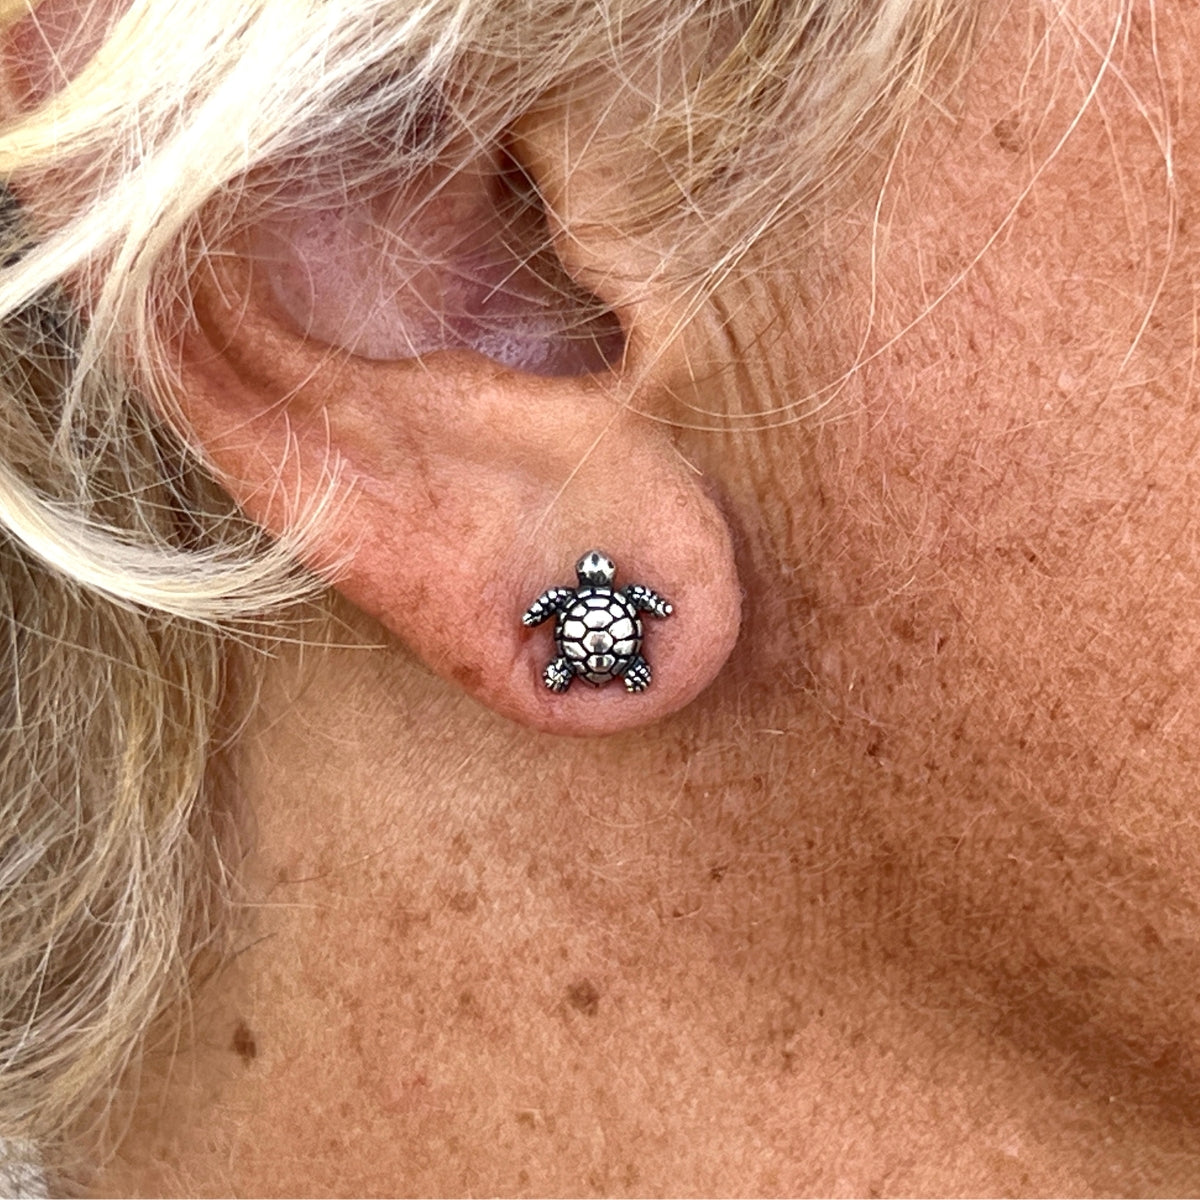 These sterling silver turtle earrings are a charming addition to any jewelry collection. The earrings feature a pair of baby sea turtles, crafted in intricate detail with their shells, flippers, and heads. The earrings are designed as post earrings, making them easy and comfortable to wear.